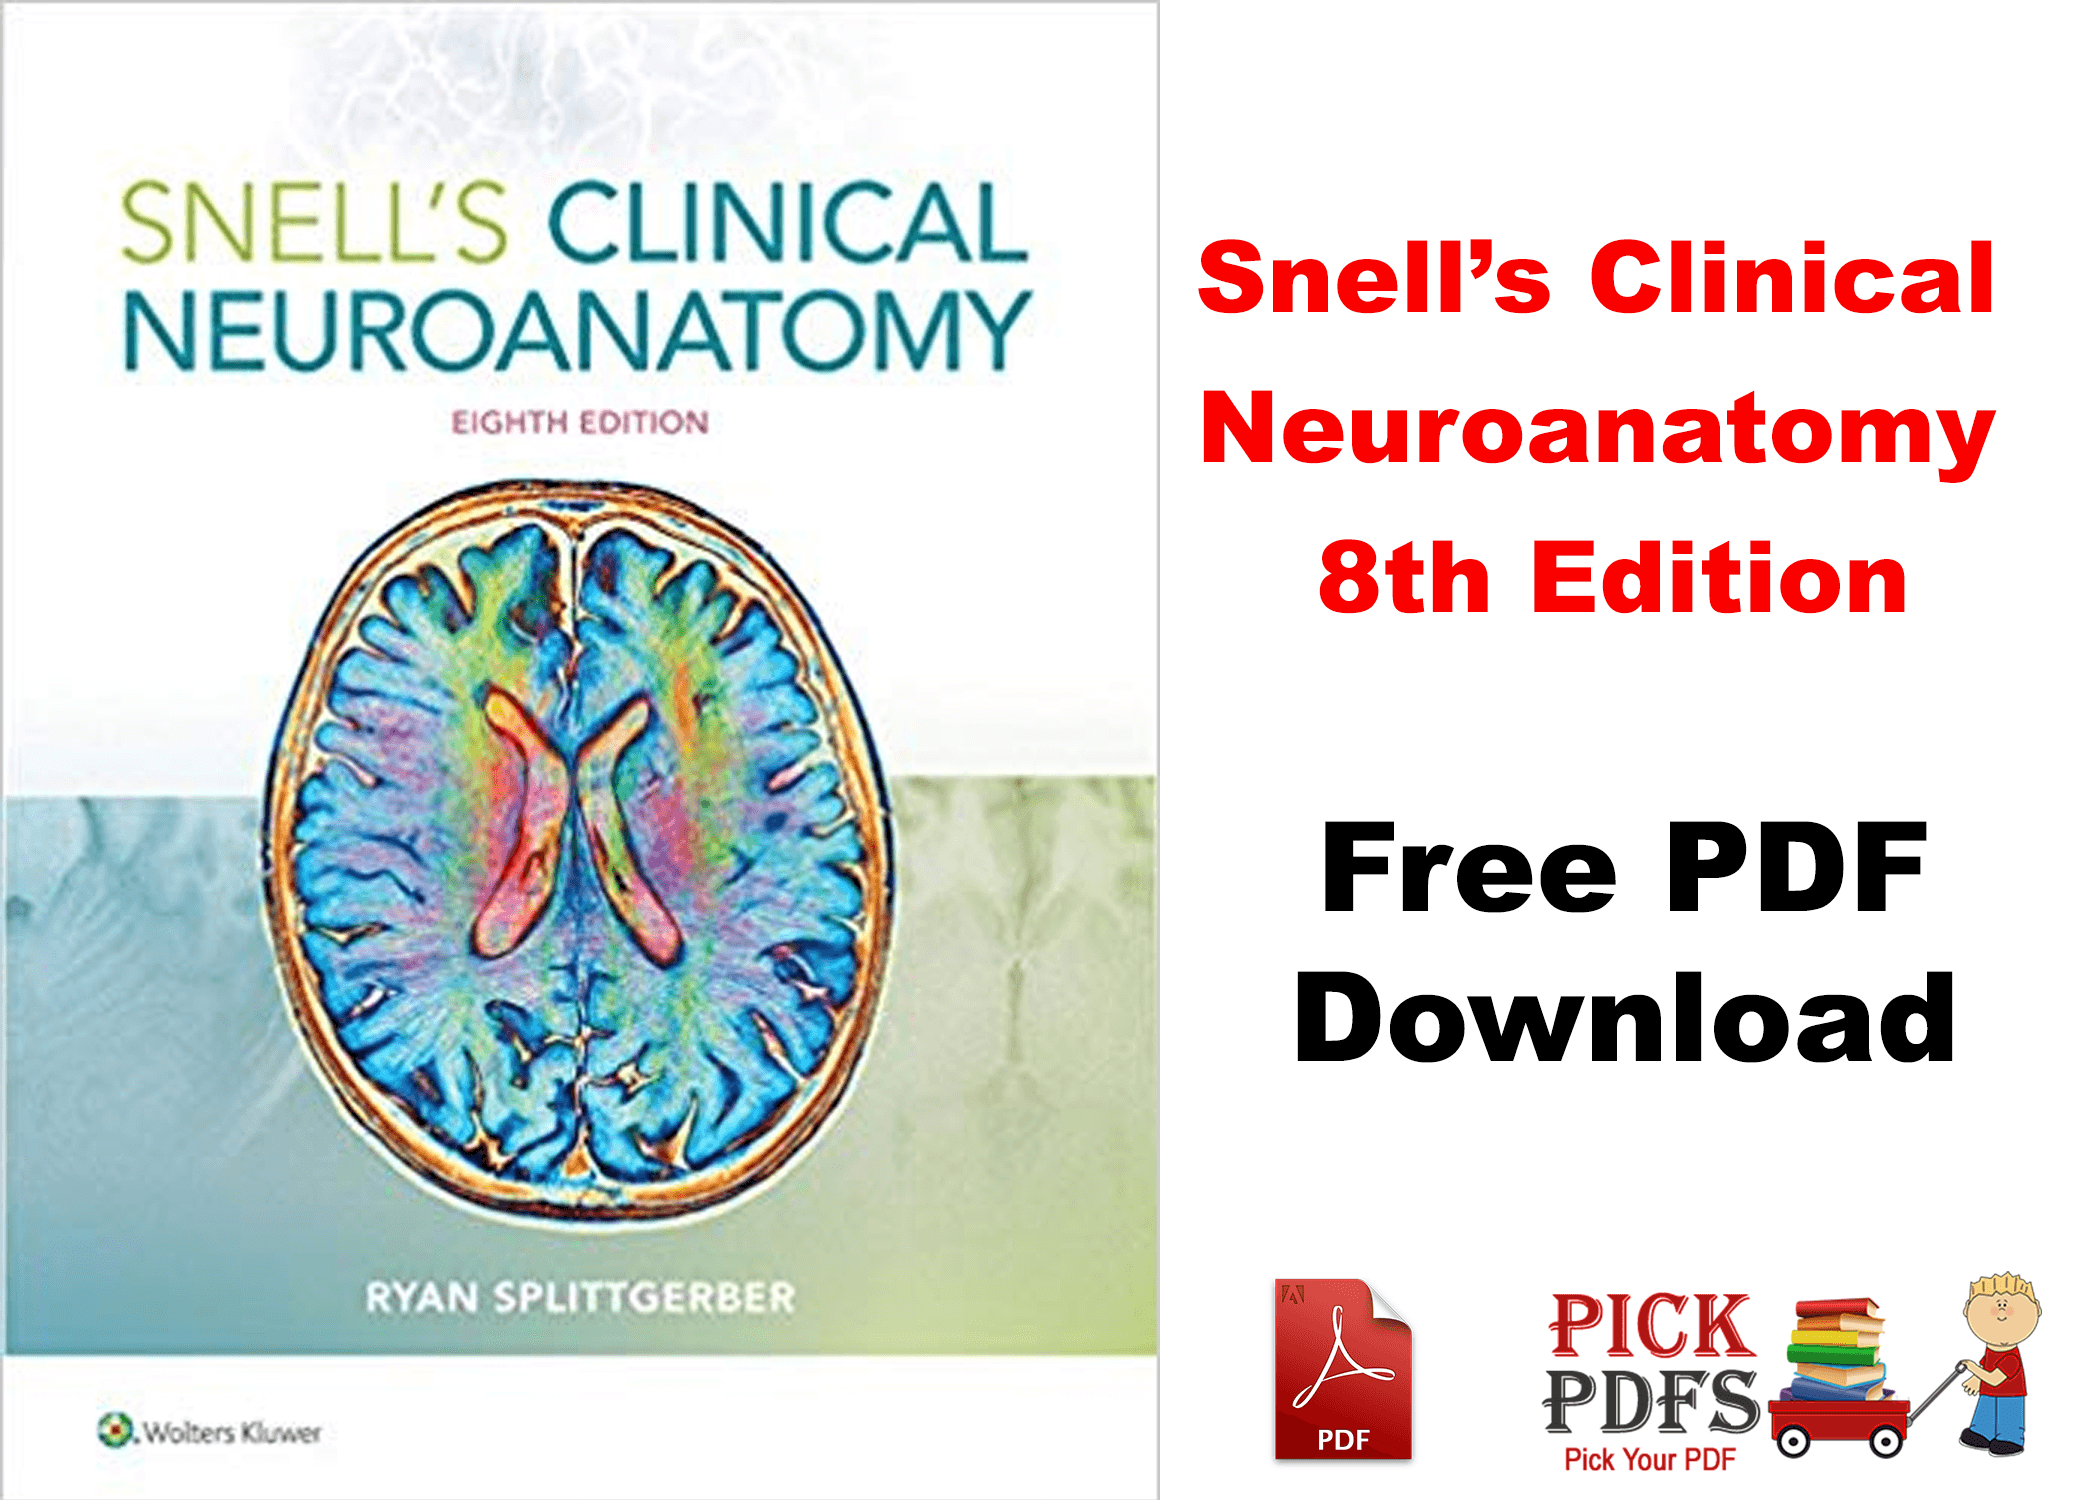 https://pickpdfs.com/snells-clinical-neuroanatomy-8th-edition-free-pdf-download-direct-link/